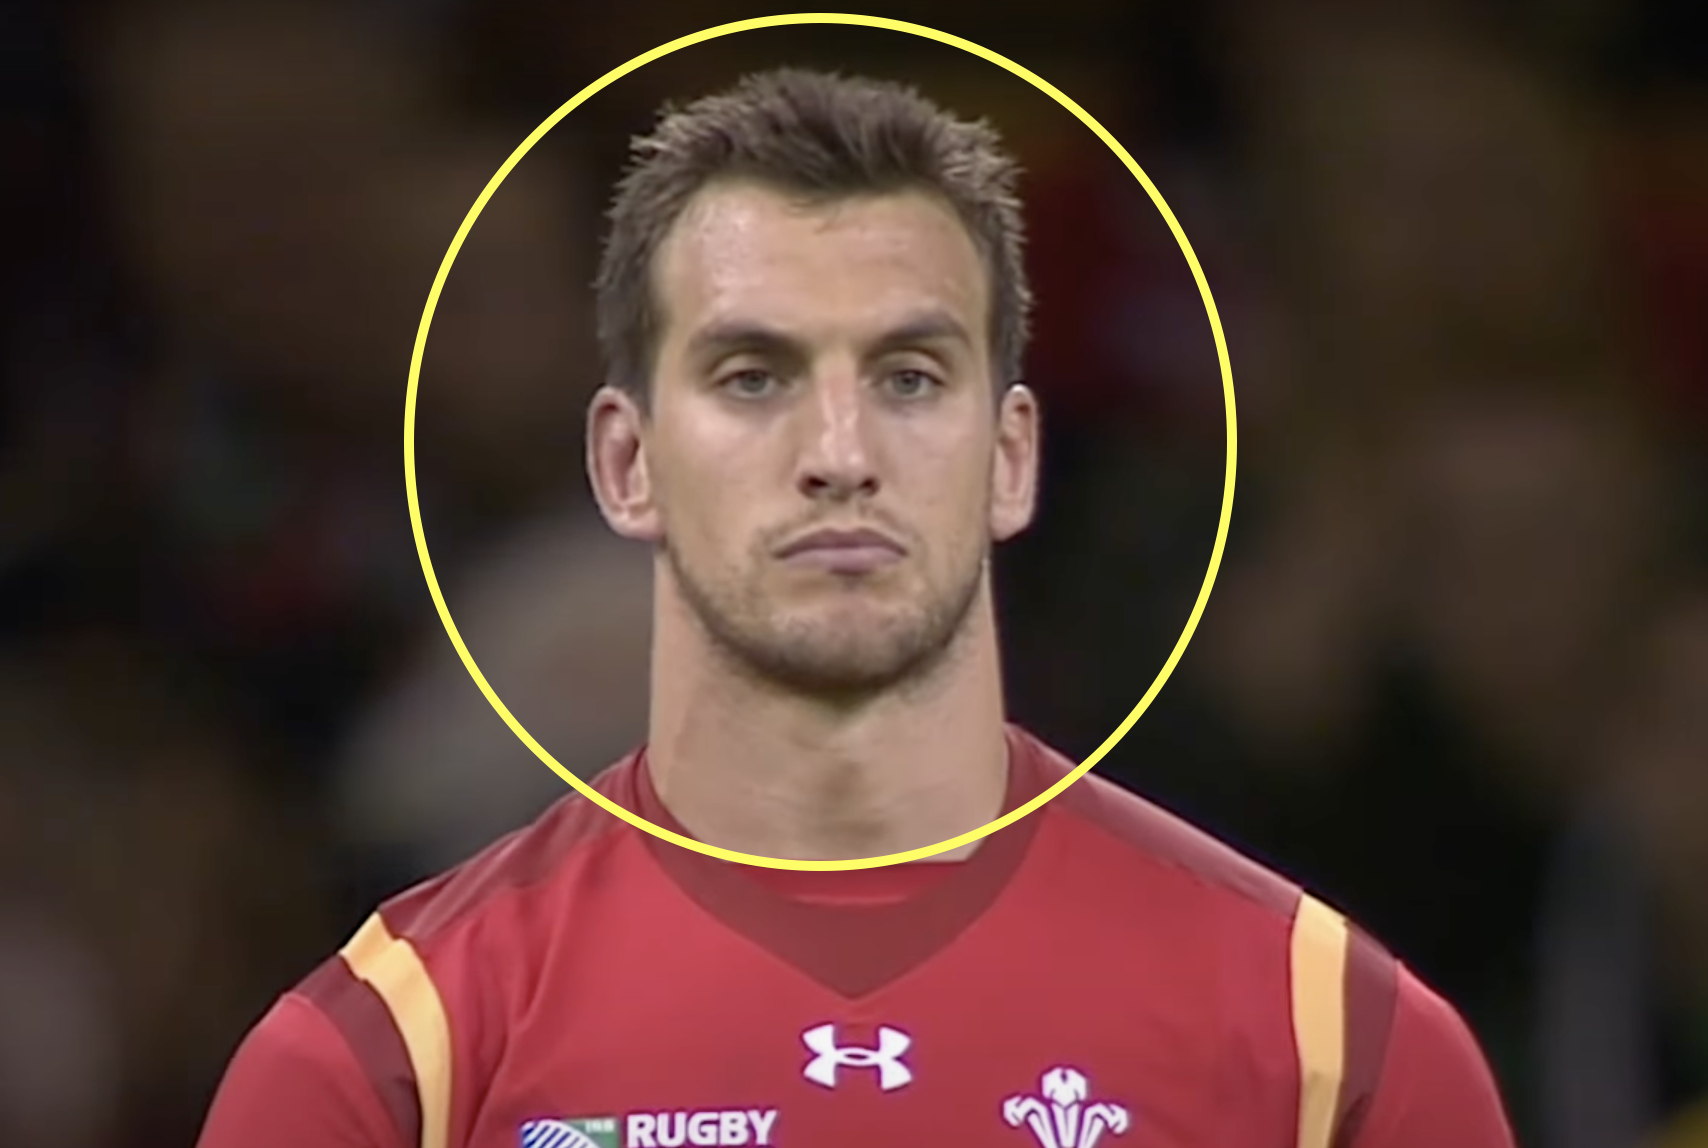 Sam Warburton risks being disowned by Wales with dangerously pro-English prediction